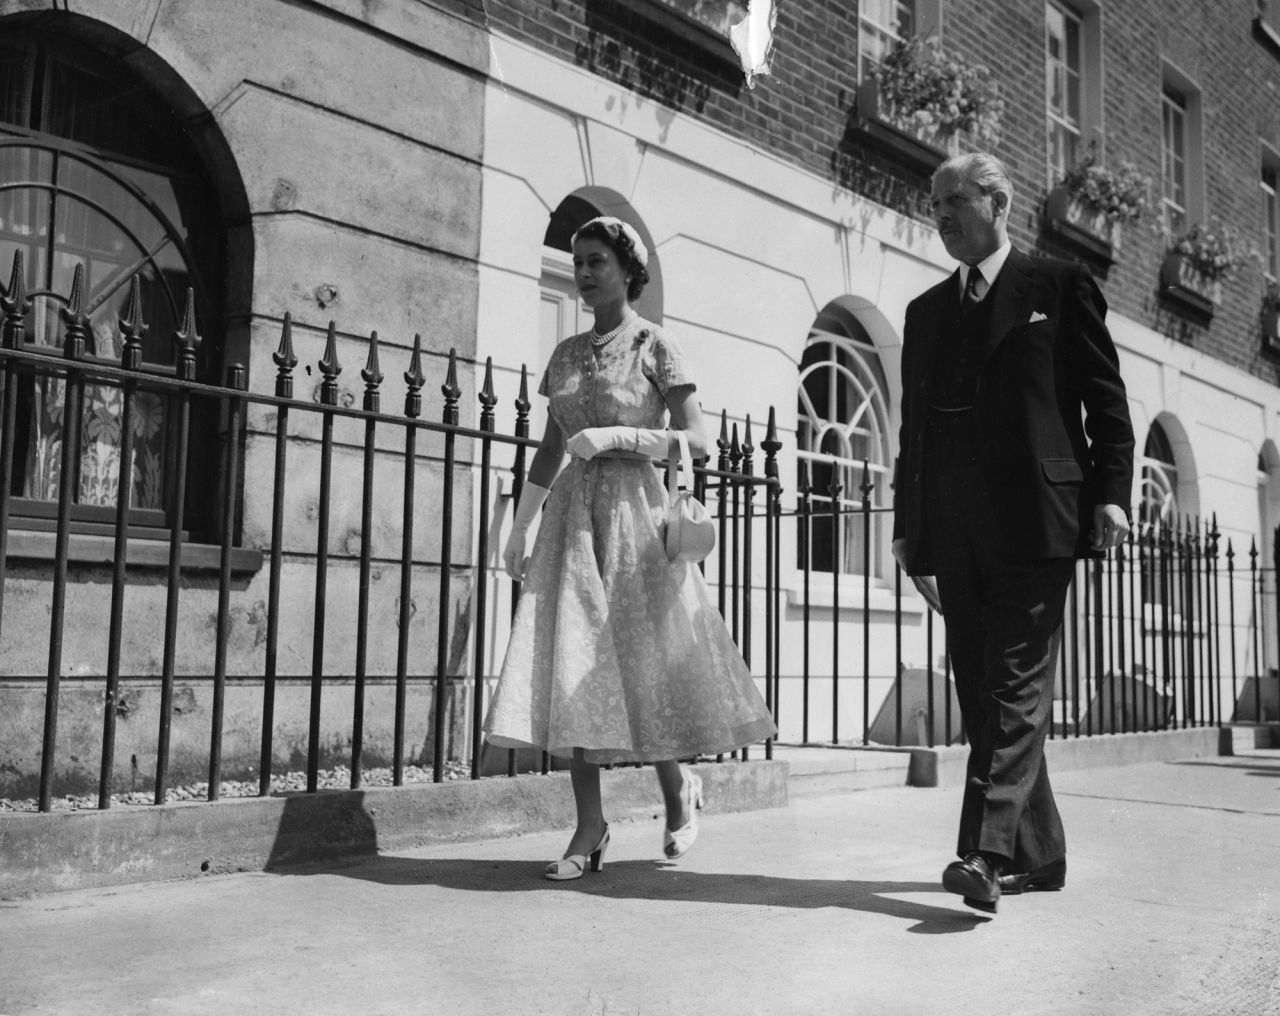 <strong>Harold Macmillan (1957-1963):</strong> The Queen originally found Macmillan difficult to deal with, but they eventually warmed to each other. Her Majesty relied on Macmillan for his wise counsel — both while in office and after his retirement in 1963.